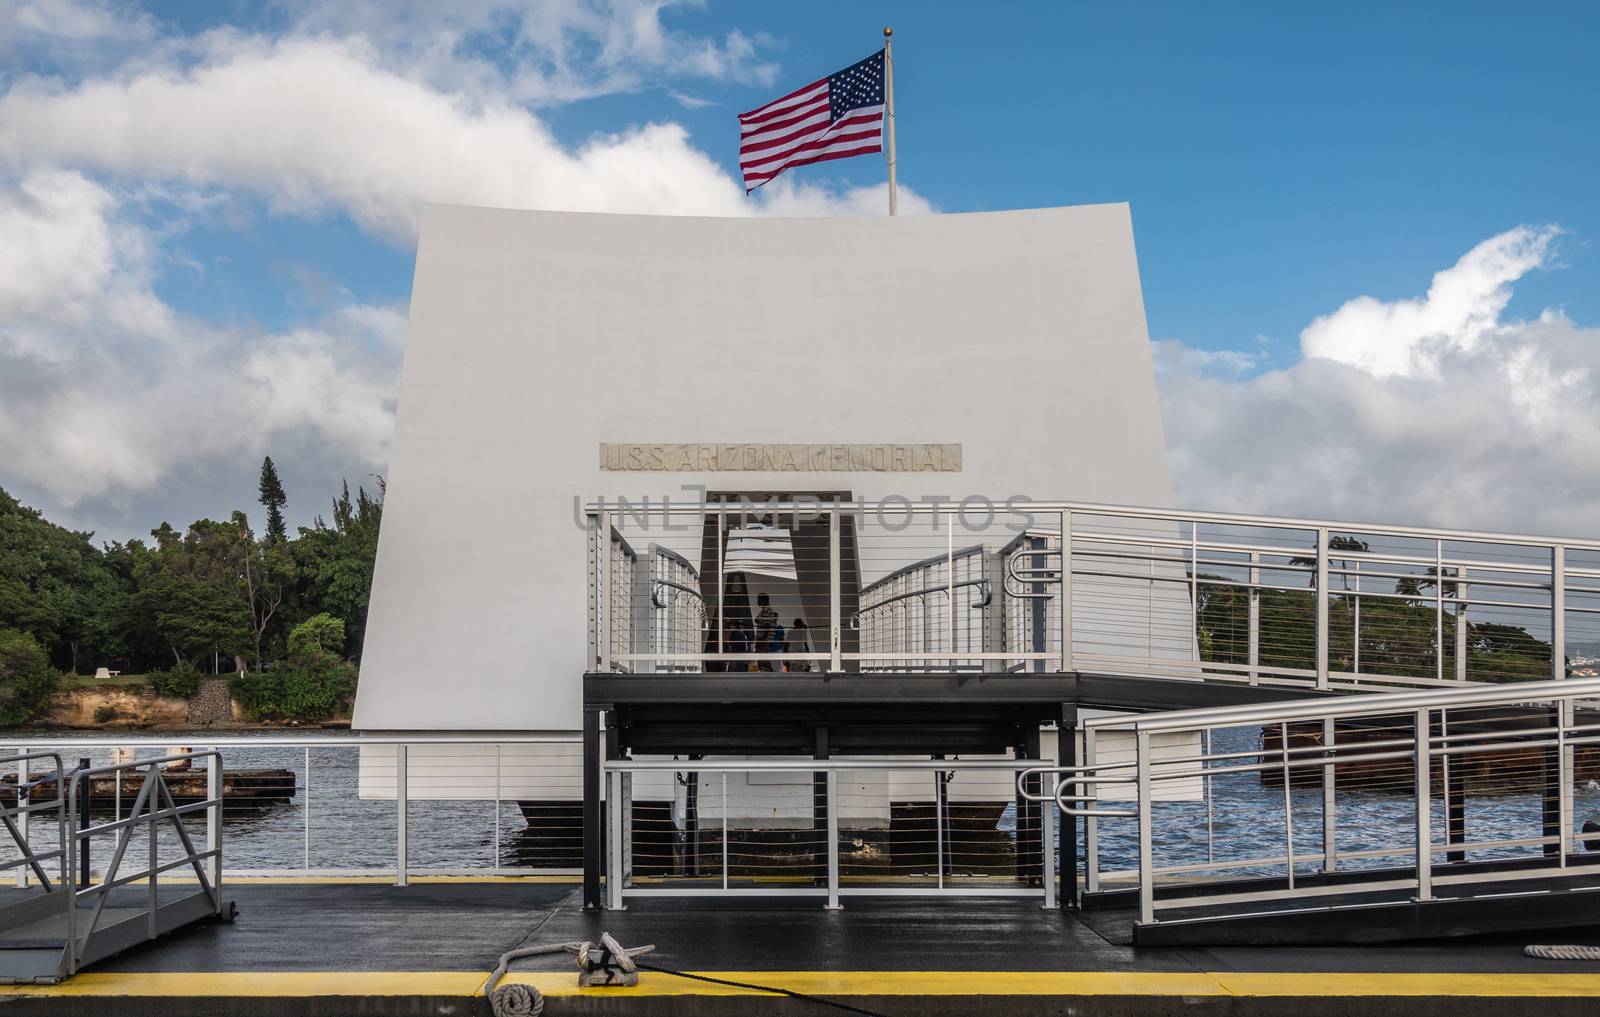 Dock and Entrance to USS Arizona memorial in Pearl Harbor, Oahu, by Claudine